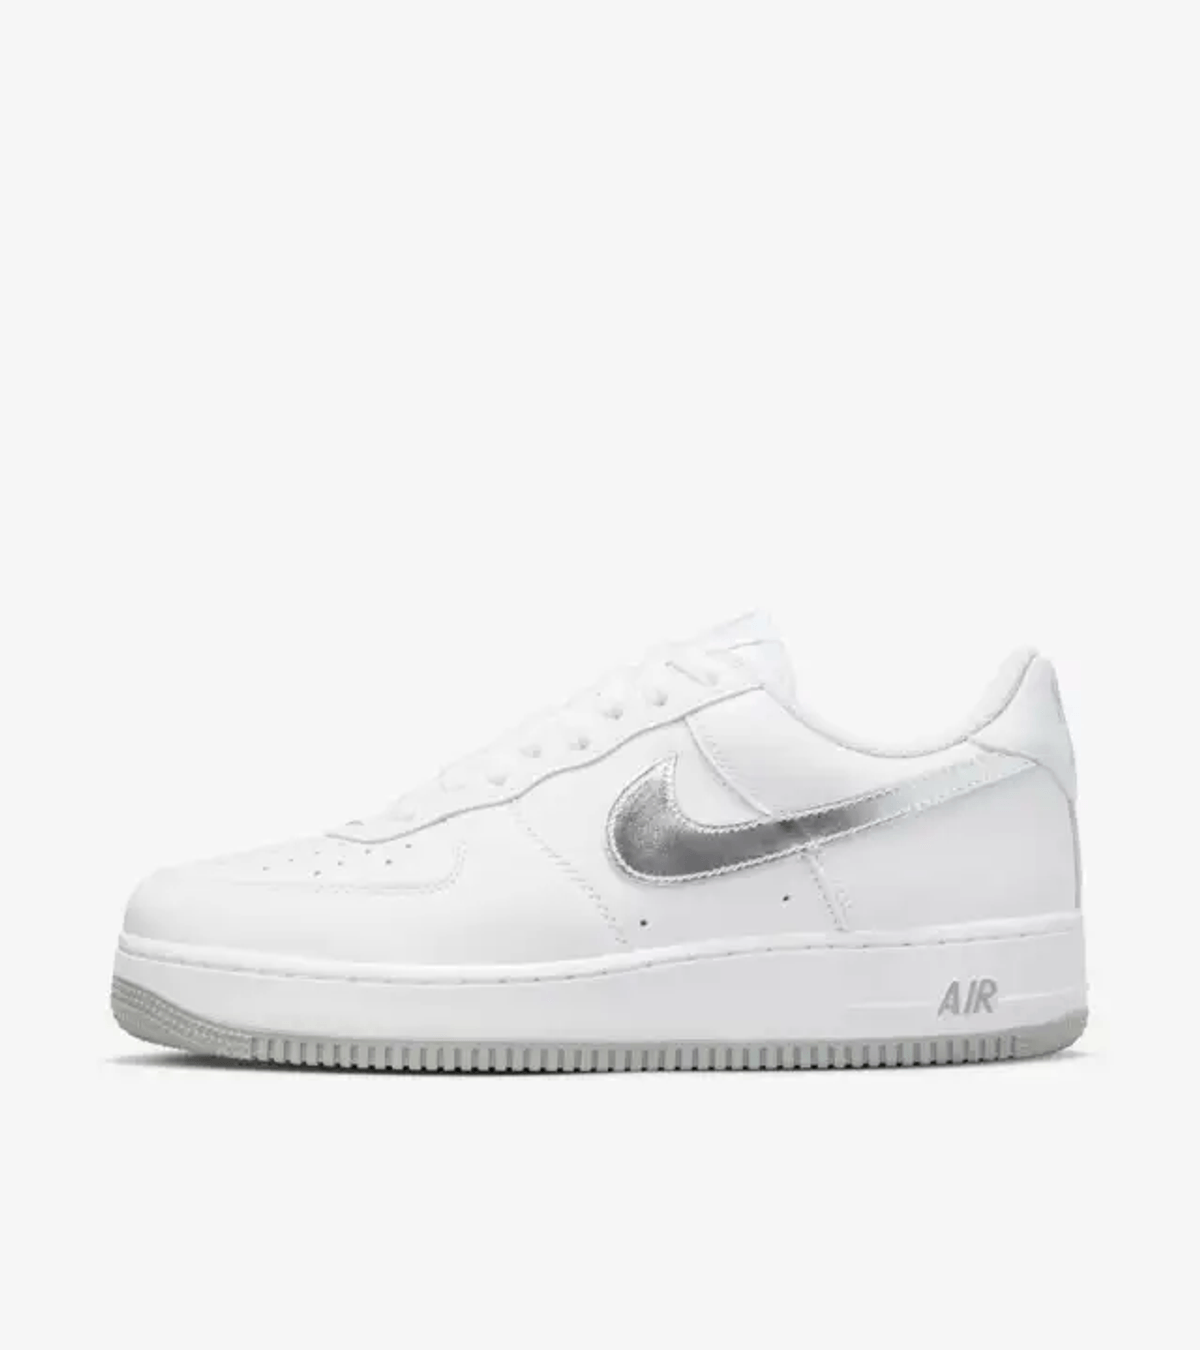 Nike Air Force 1 '07 Low Color of the Month White Metallic Silver